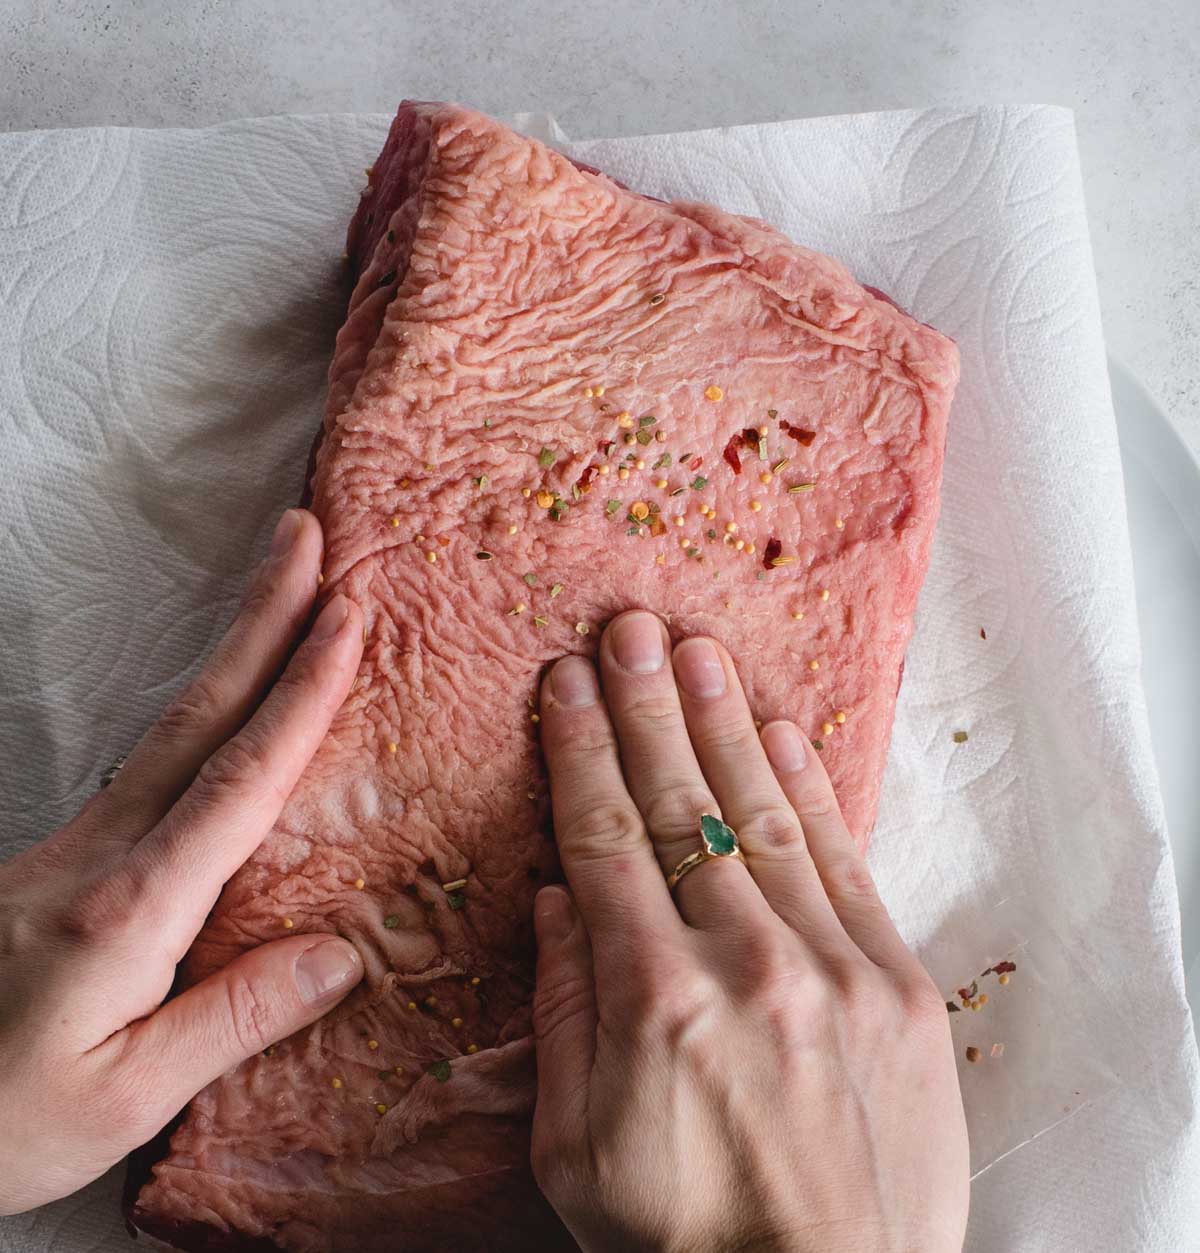 hands rubbing spices onto fatty side of corned beef